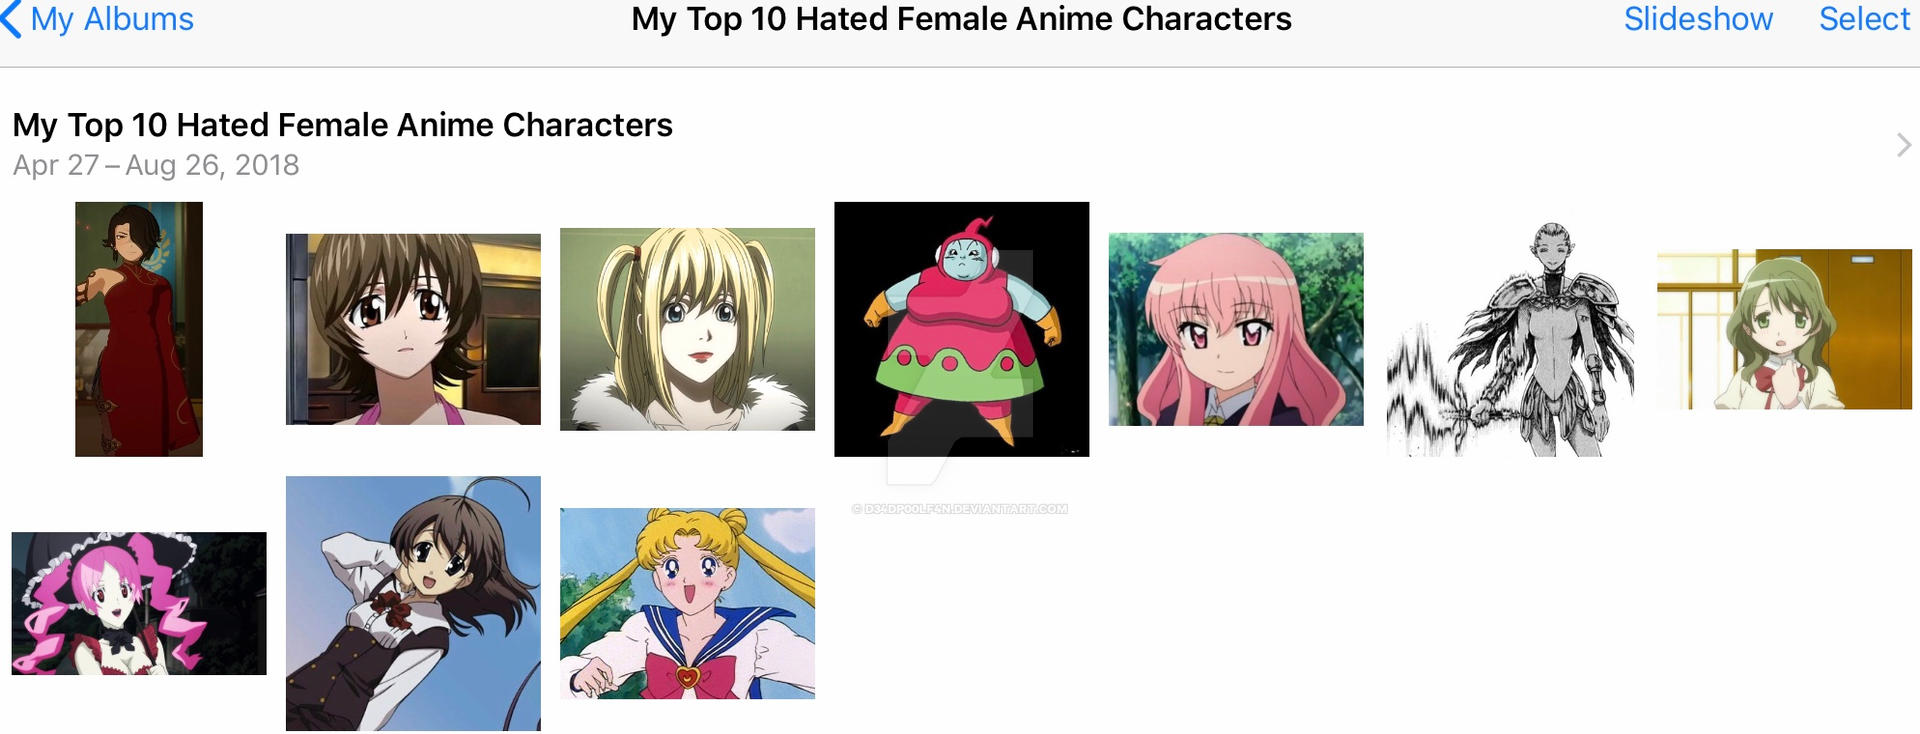 My Top 10 Hated Female Anime Characters [NEW] by D34DP00LF4N on DeviantArt